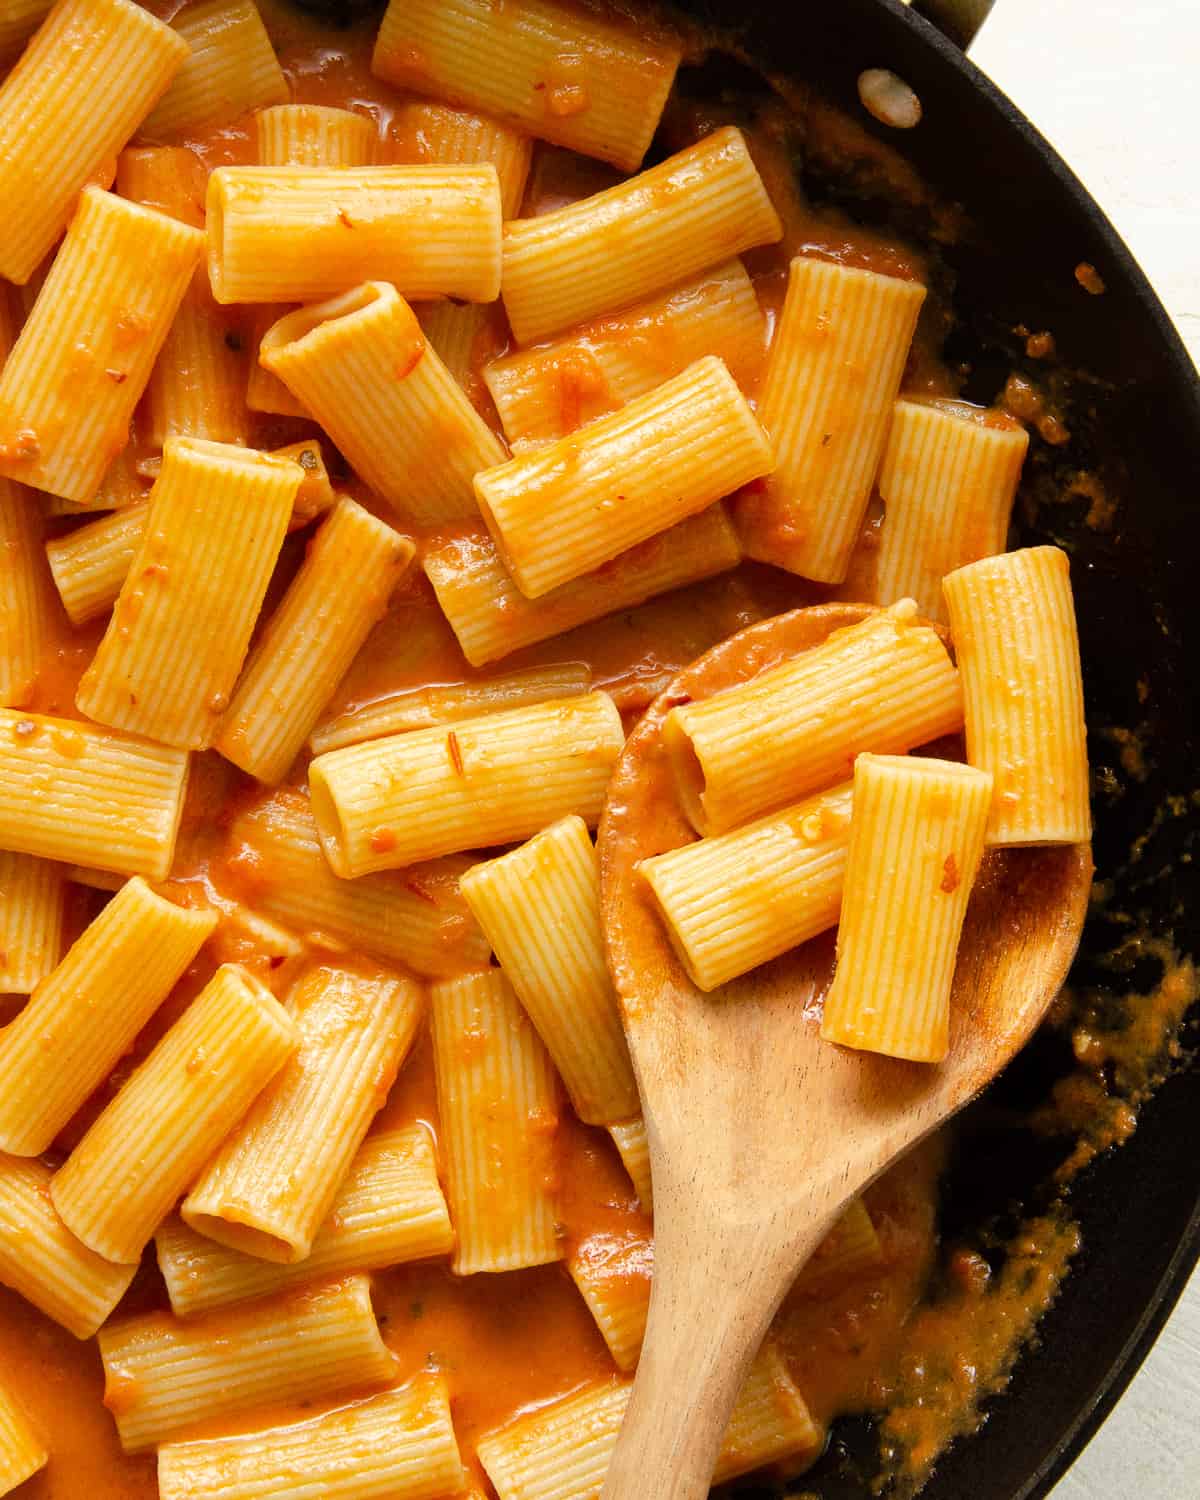 Skillet full of rigatoni and dairy free pink pasta sauce.